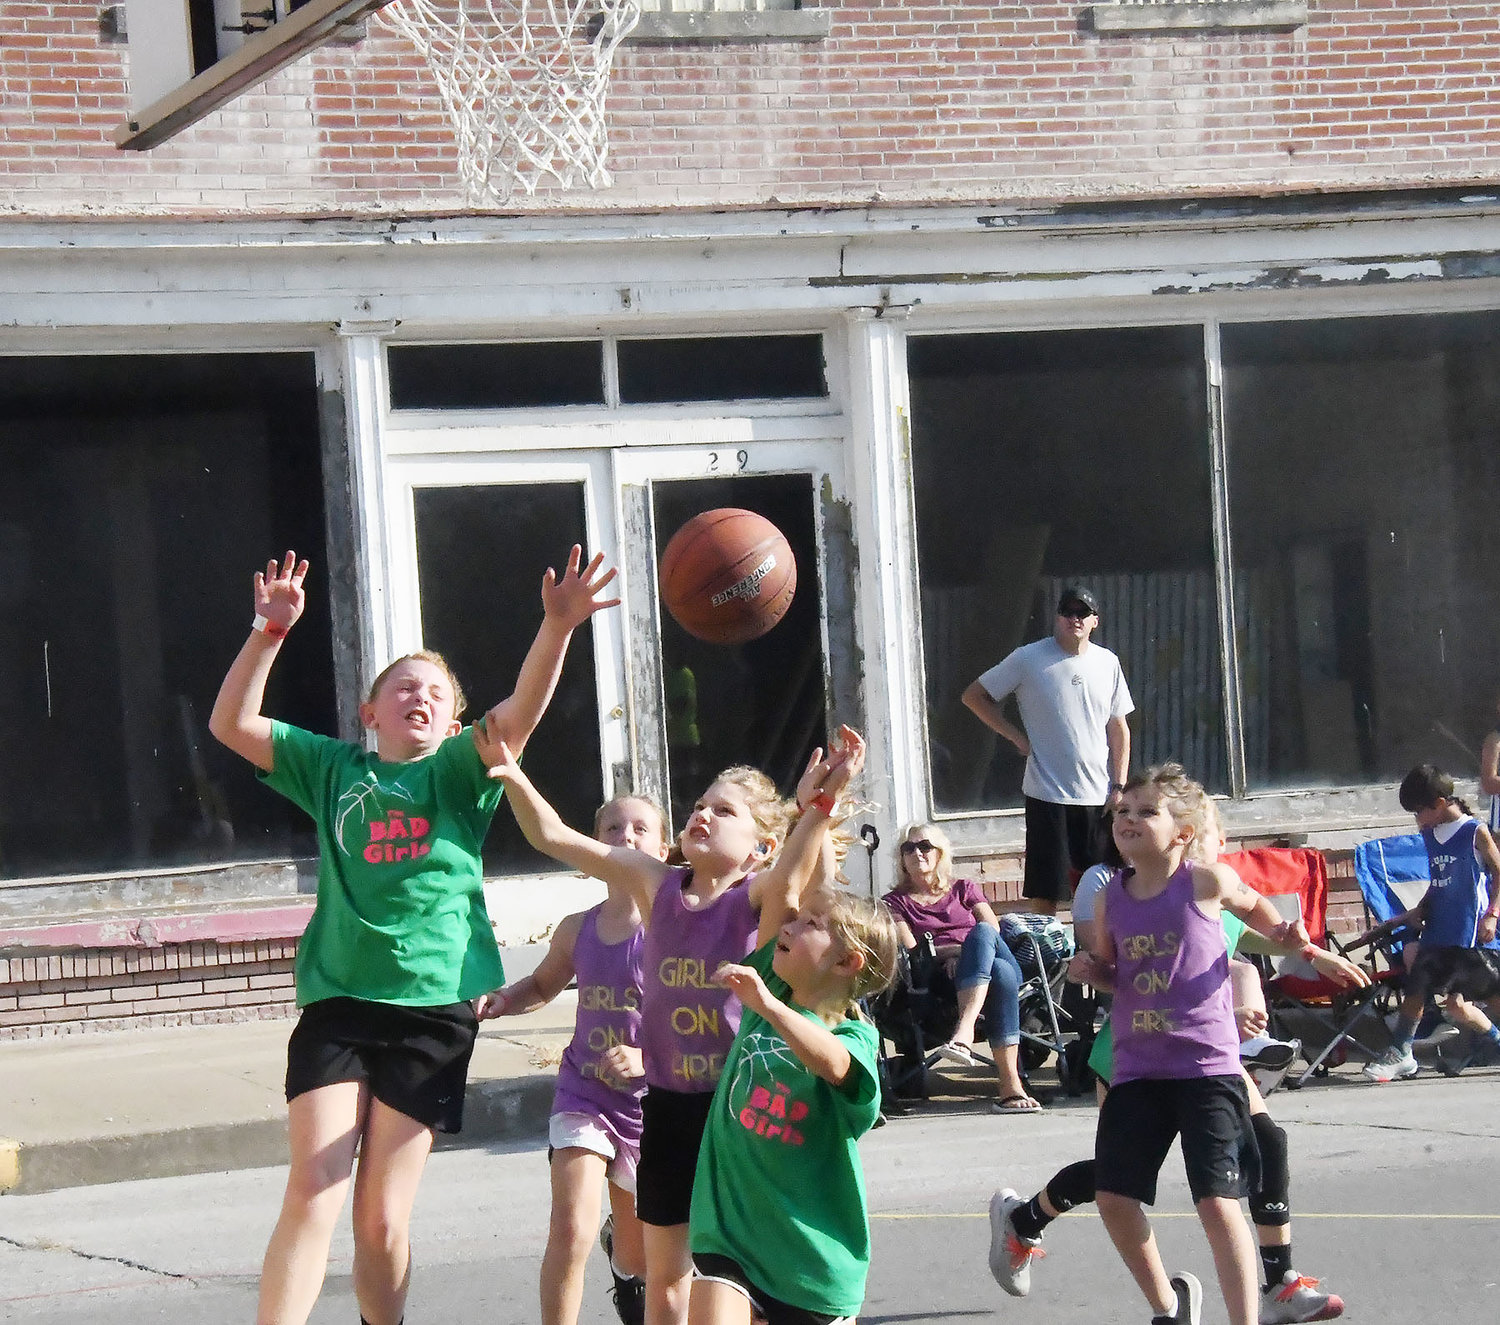 It was Girls on Fire (purple) versus Bad Girls (green) in this heated game on the girls' court.